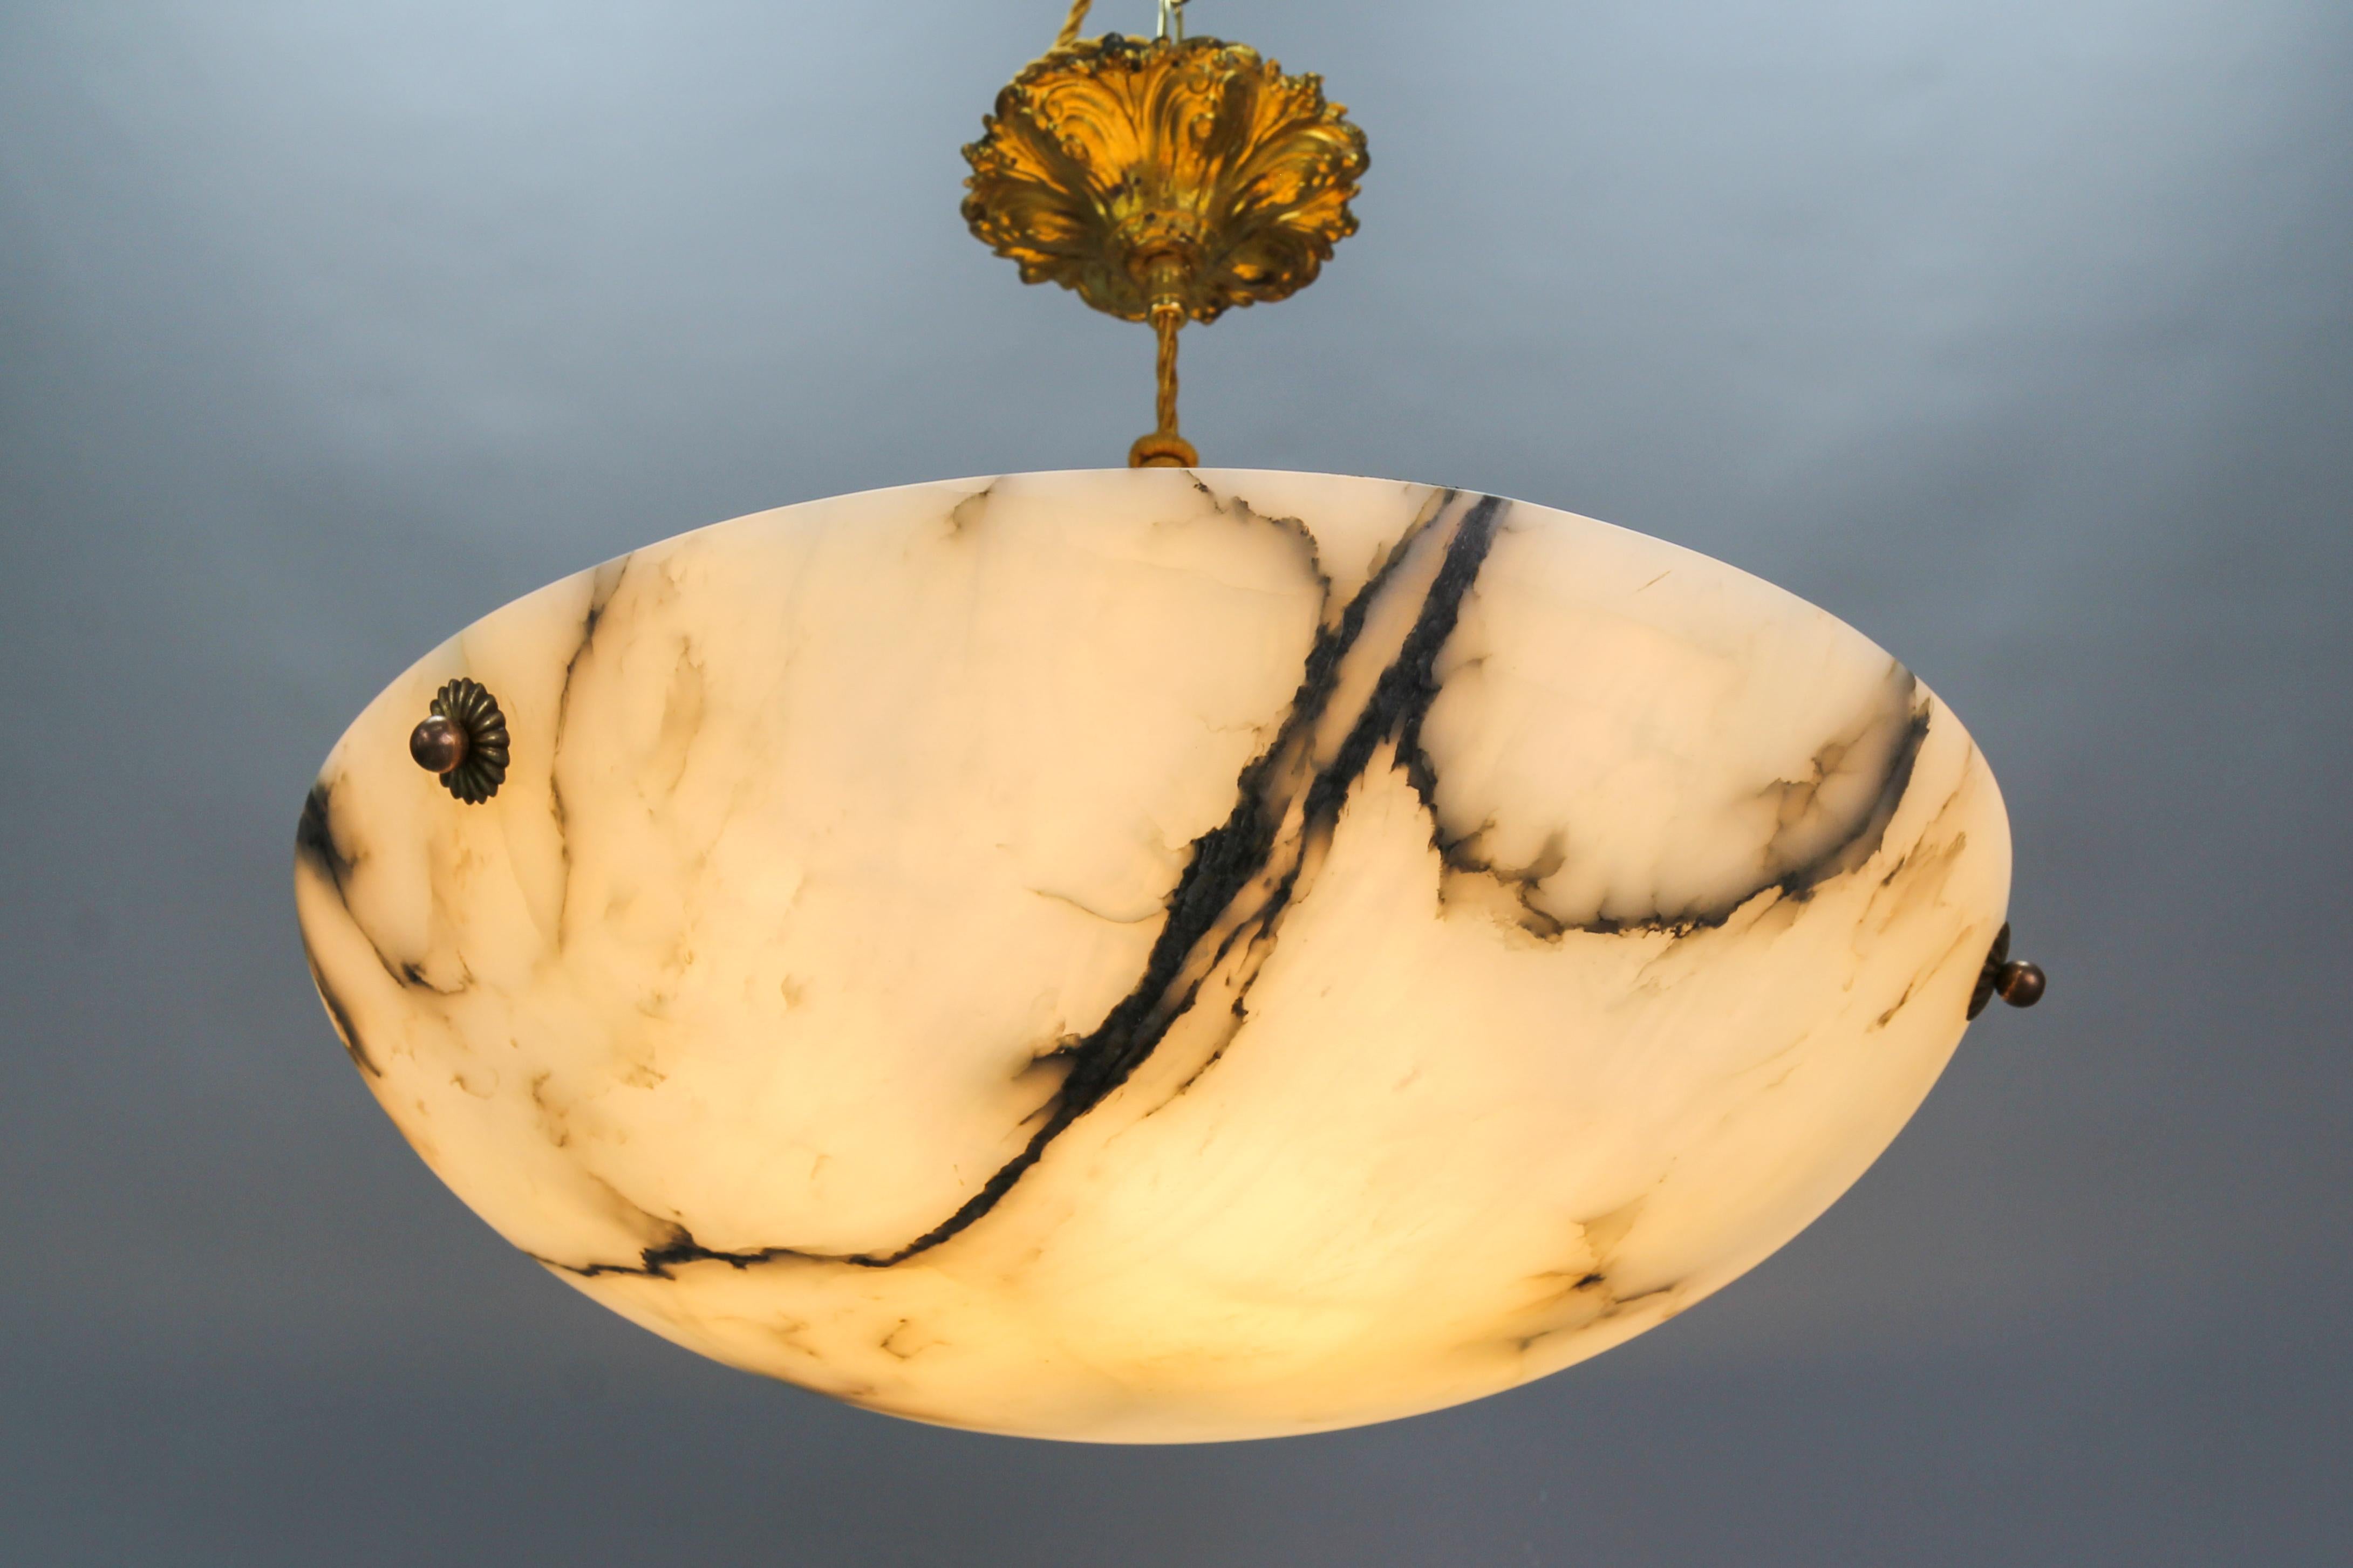 An Art Nouveau period white and black veined alabaster pendant light fixture.
A wonderful alabaster pendant ceiling light fixture from circa the 1920s. Beautifully veined and masterfully carved one-piece white alabaster bowl suspended by three